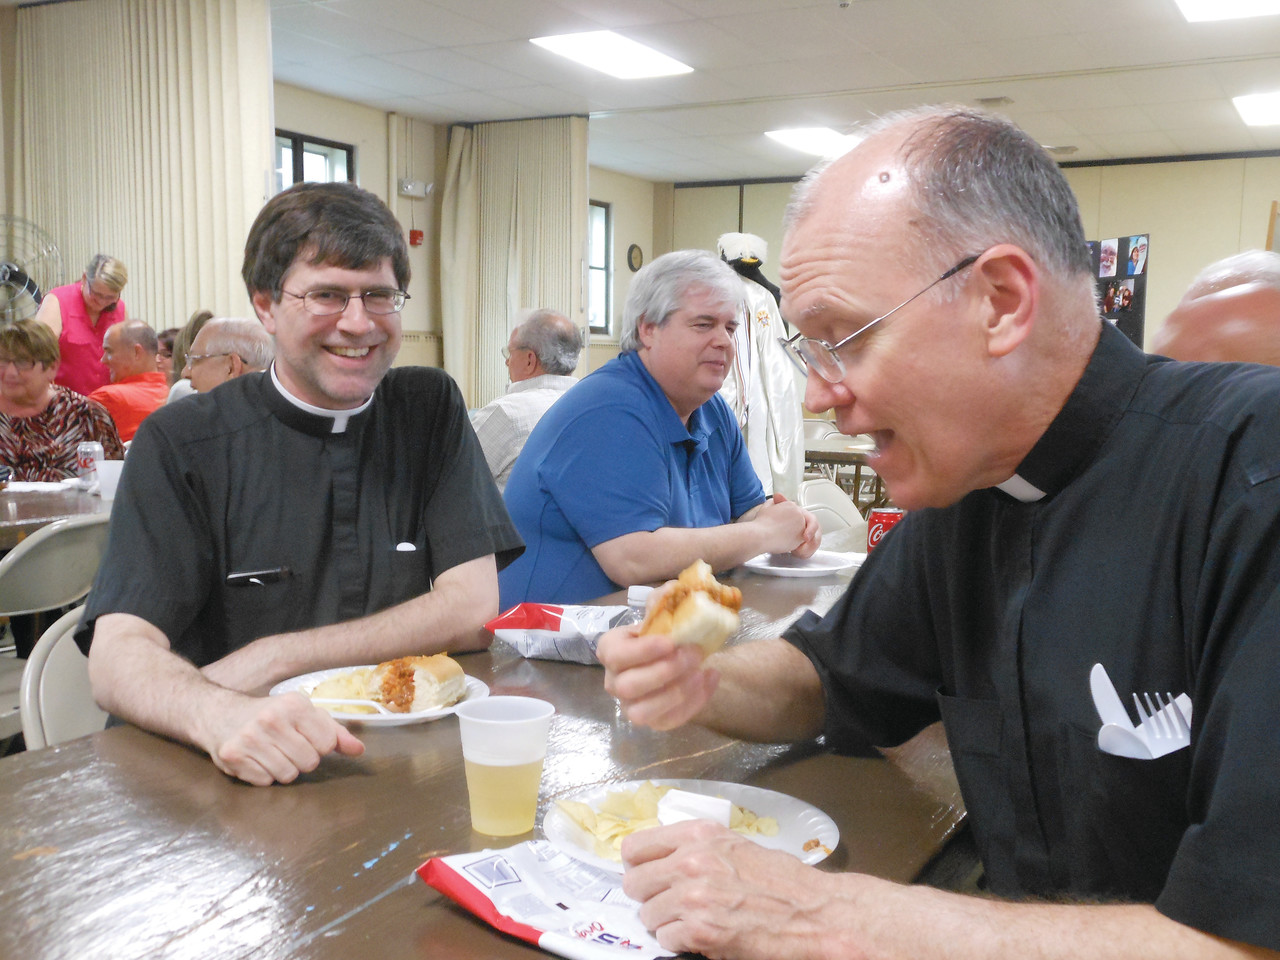 Father Michael Woolley (left), pastor at St. Joseph Church, Woonsocket, and Father Michael Kelley, pastor at St. Agatha and Precious Blood Churches, Woonsocket, chow down on dynamite sandwiches at the annual Teens Are Dynamite fundraiser sponsored by the Knights of Columbus State Council to benefit the Father Marot CYO Center and Rejoice In Hope Youth Center and hosted in St. Agatha Parish hall.